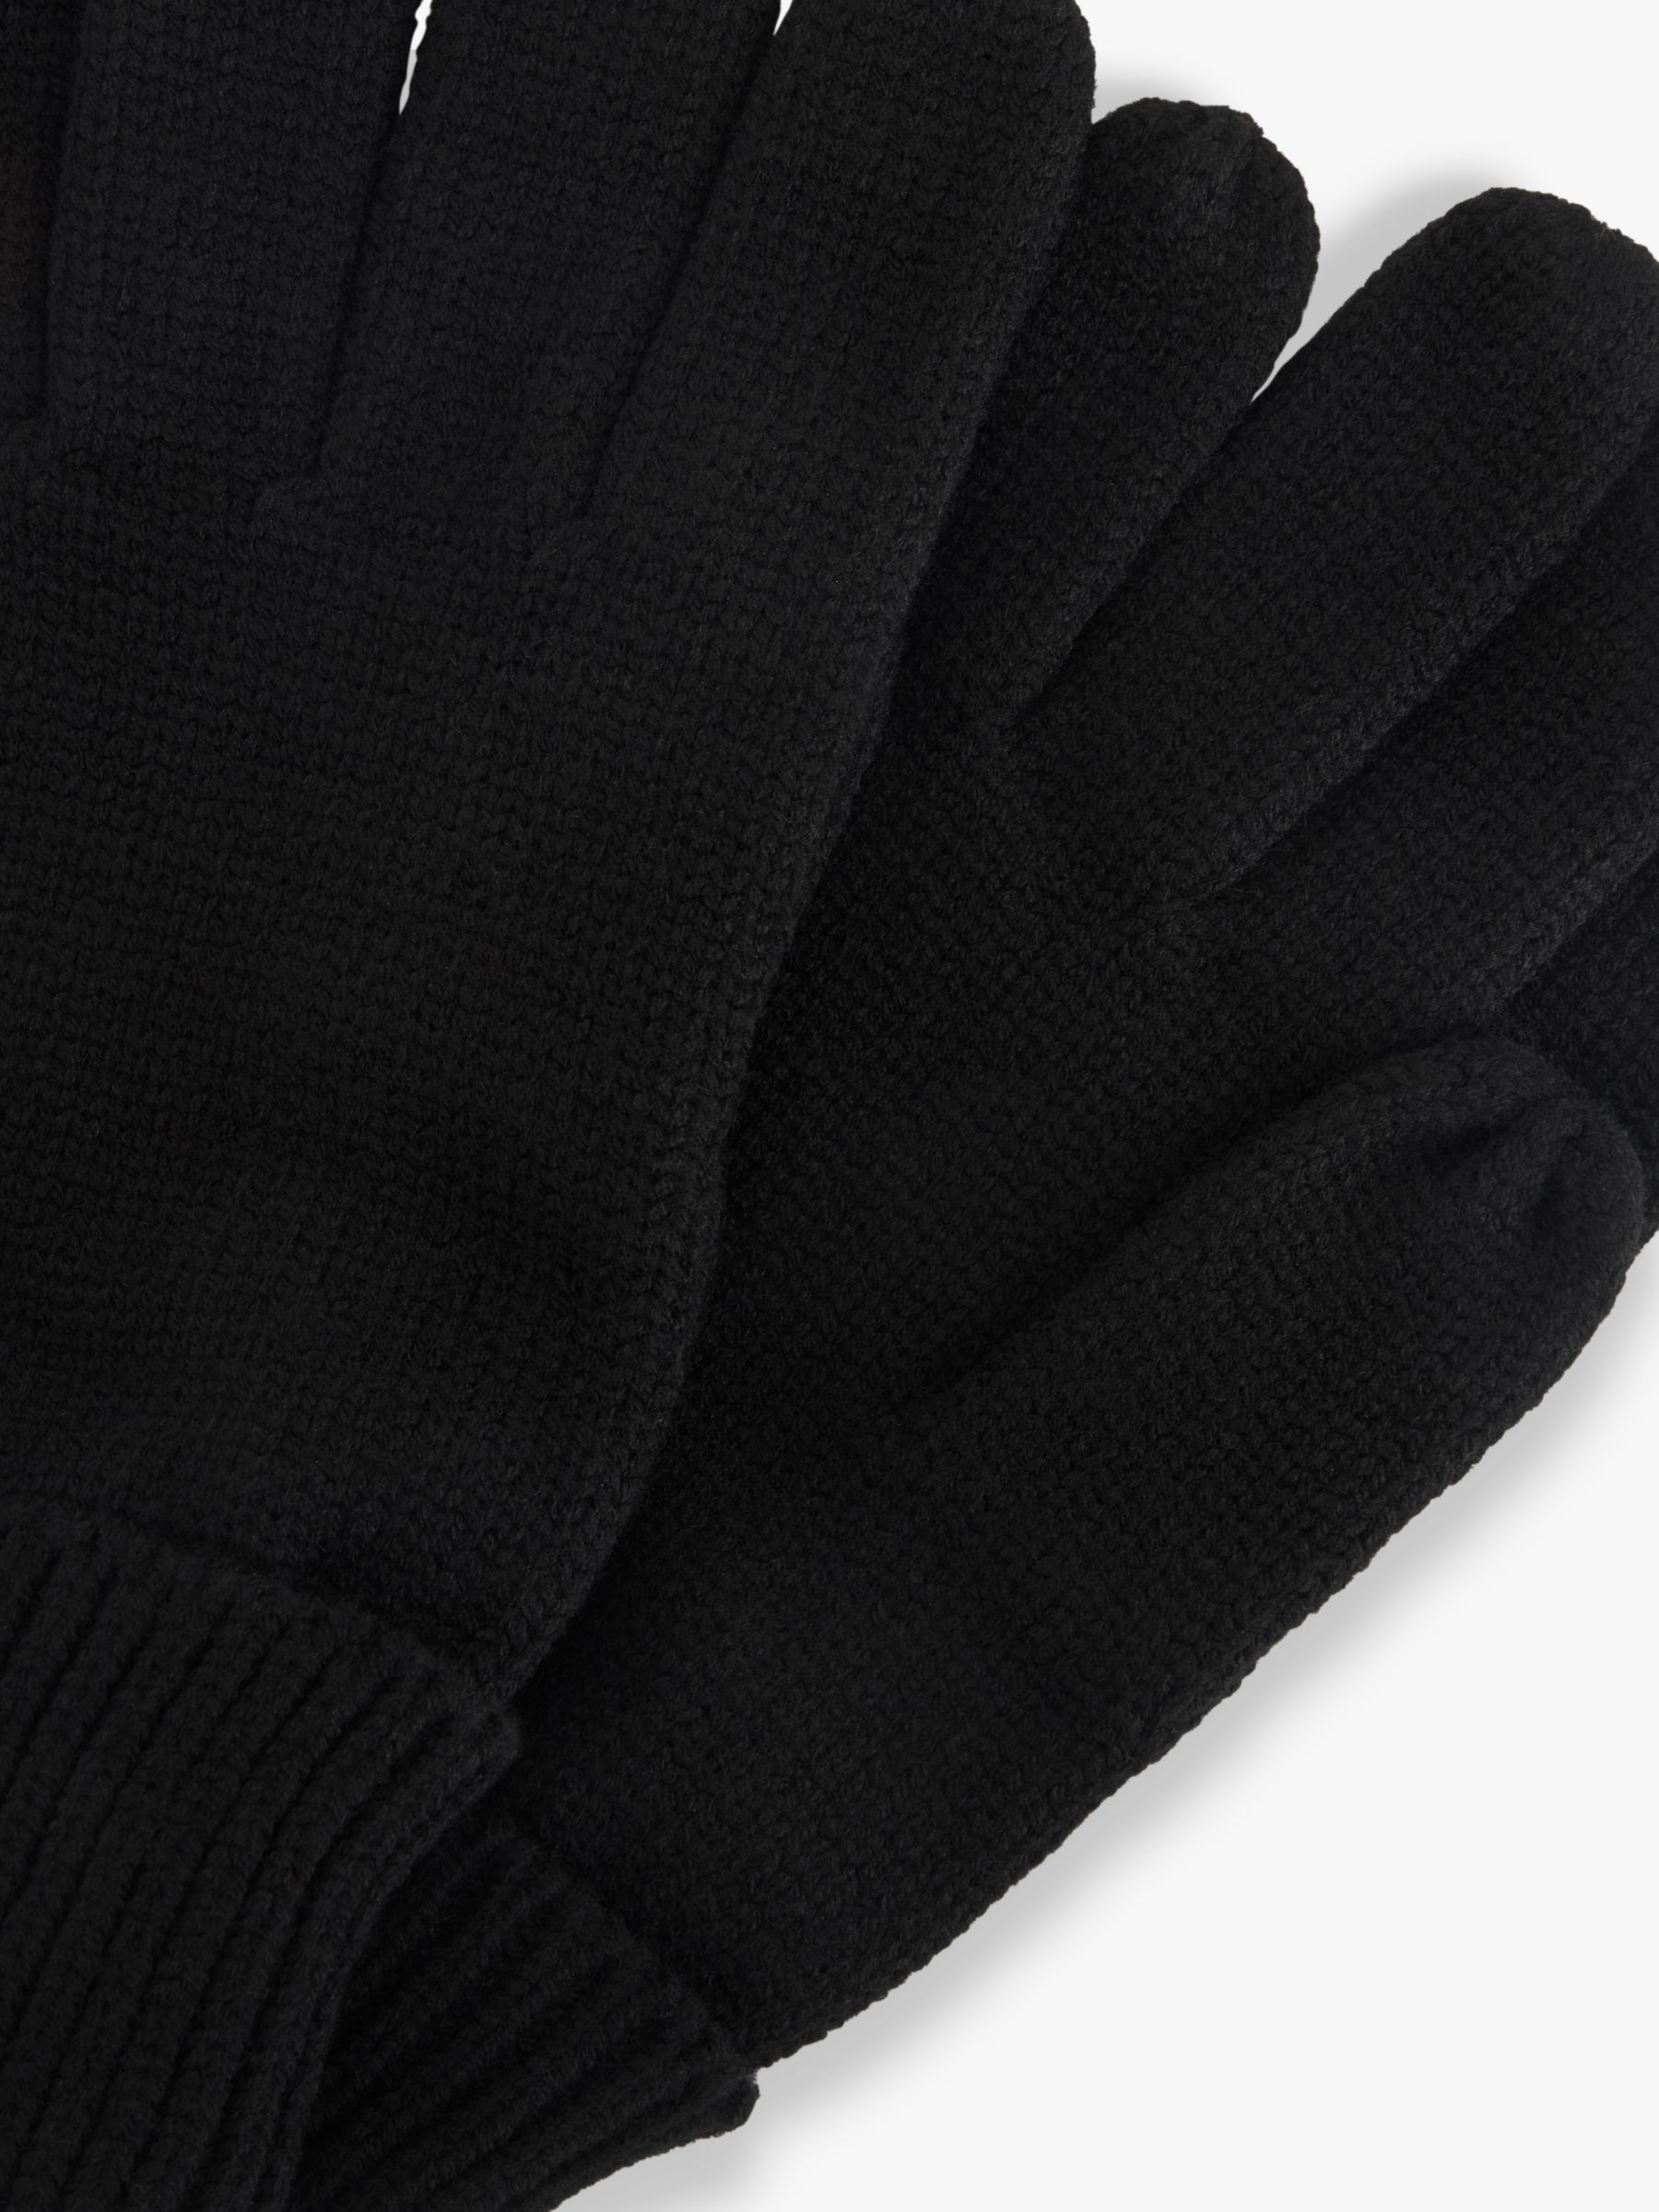 Buy John Lewis ANYDAY Knitted Gloves Online at johnlewis.com